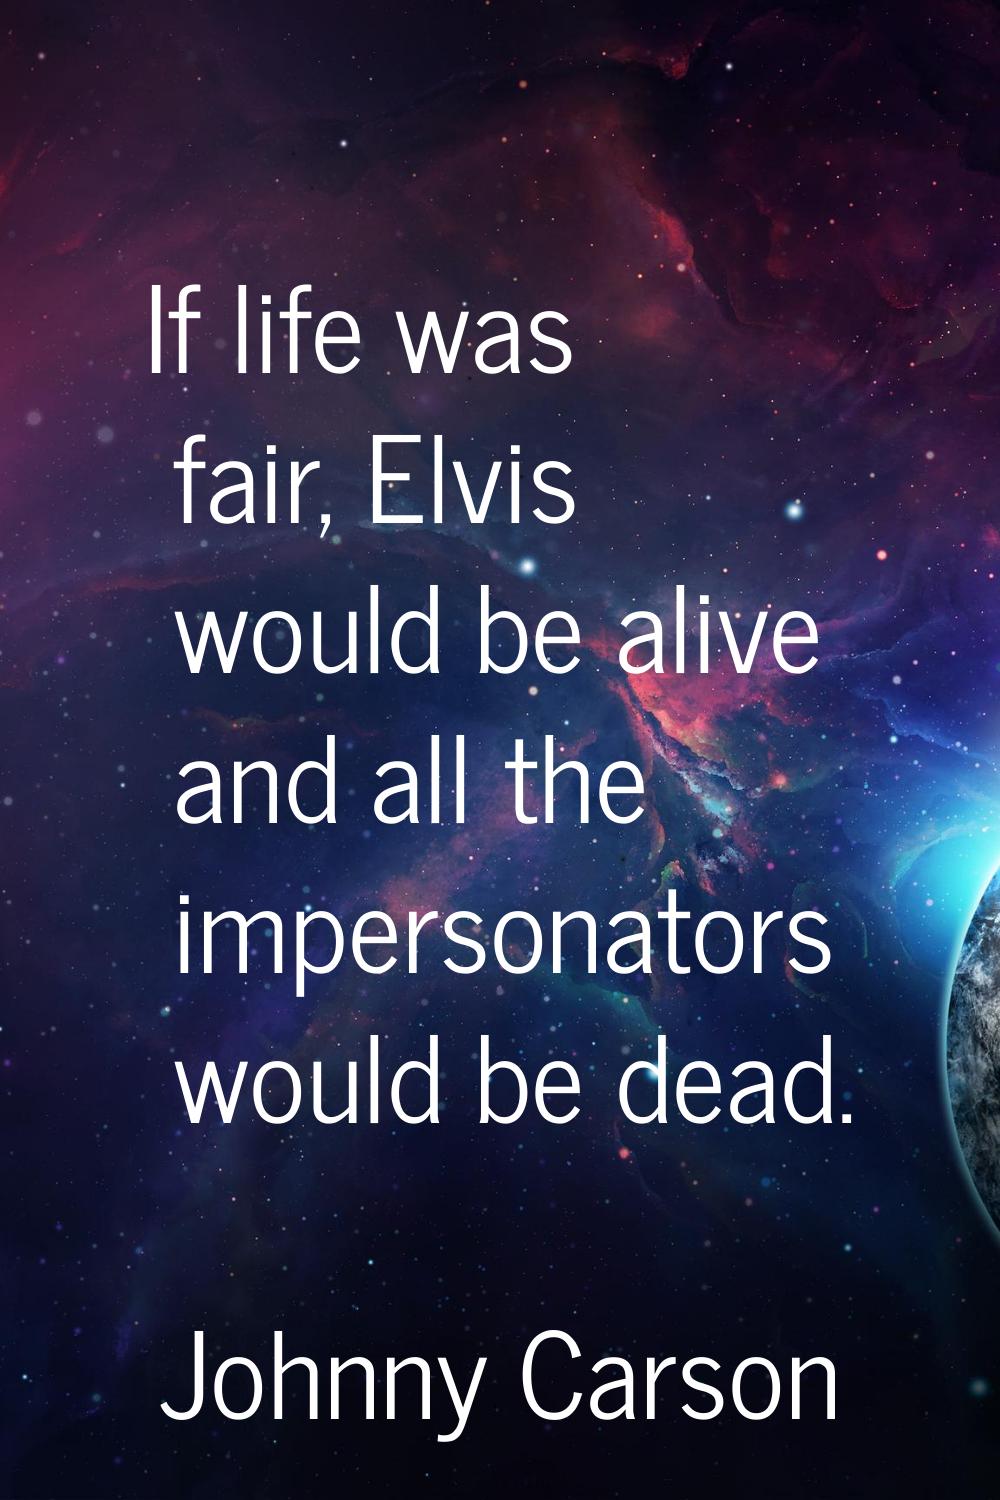 If life was fair, Elvis would be alive and all the impersonators would be dead.